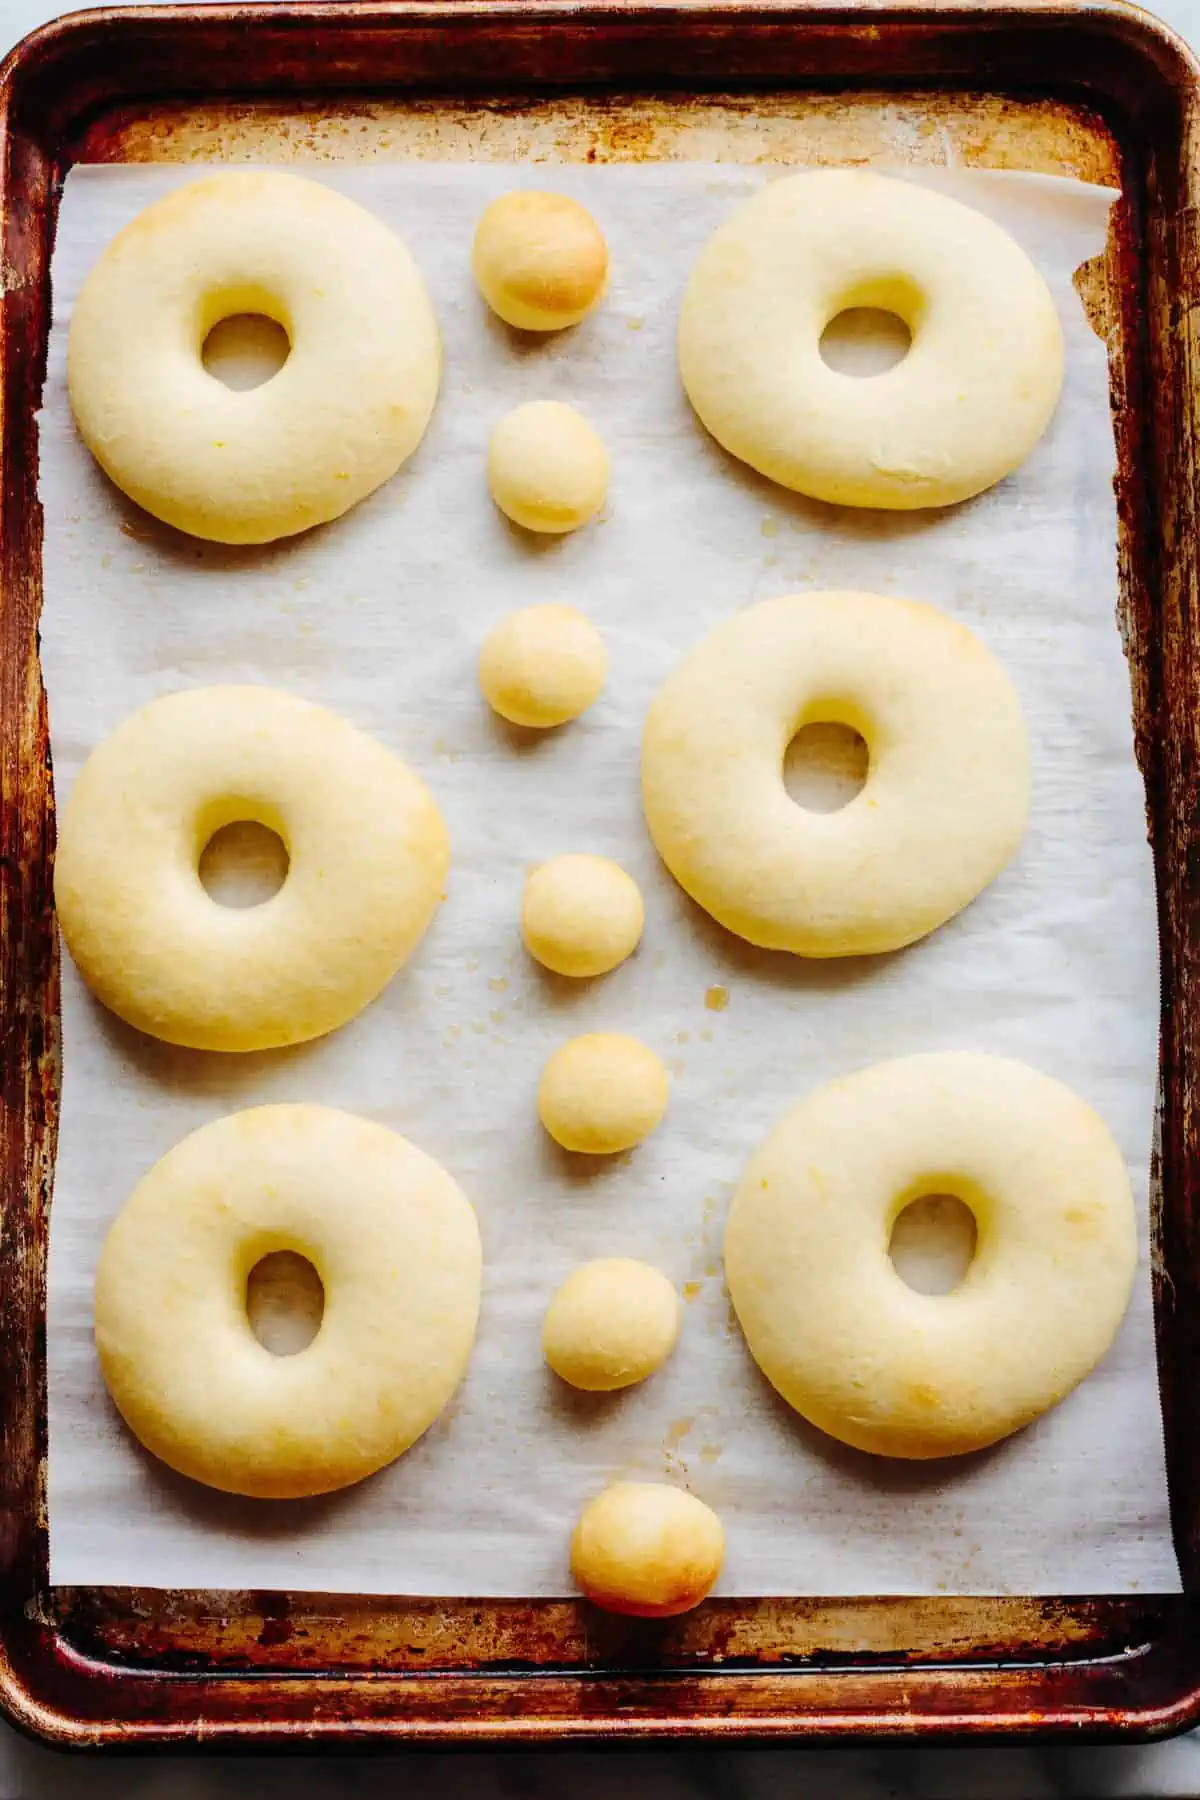 Baked lemon doughnuts and doughnut holes on a parchment lined baking sheet.